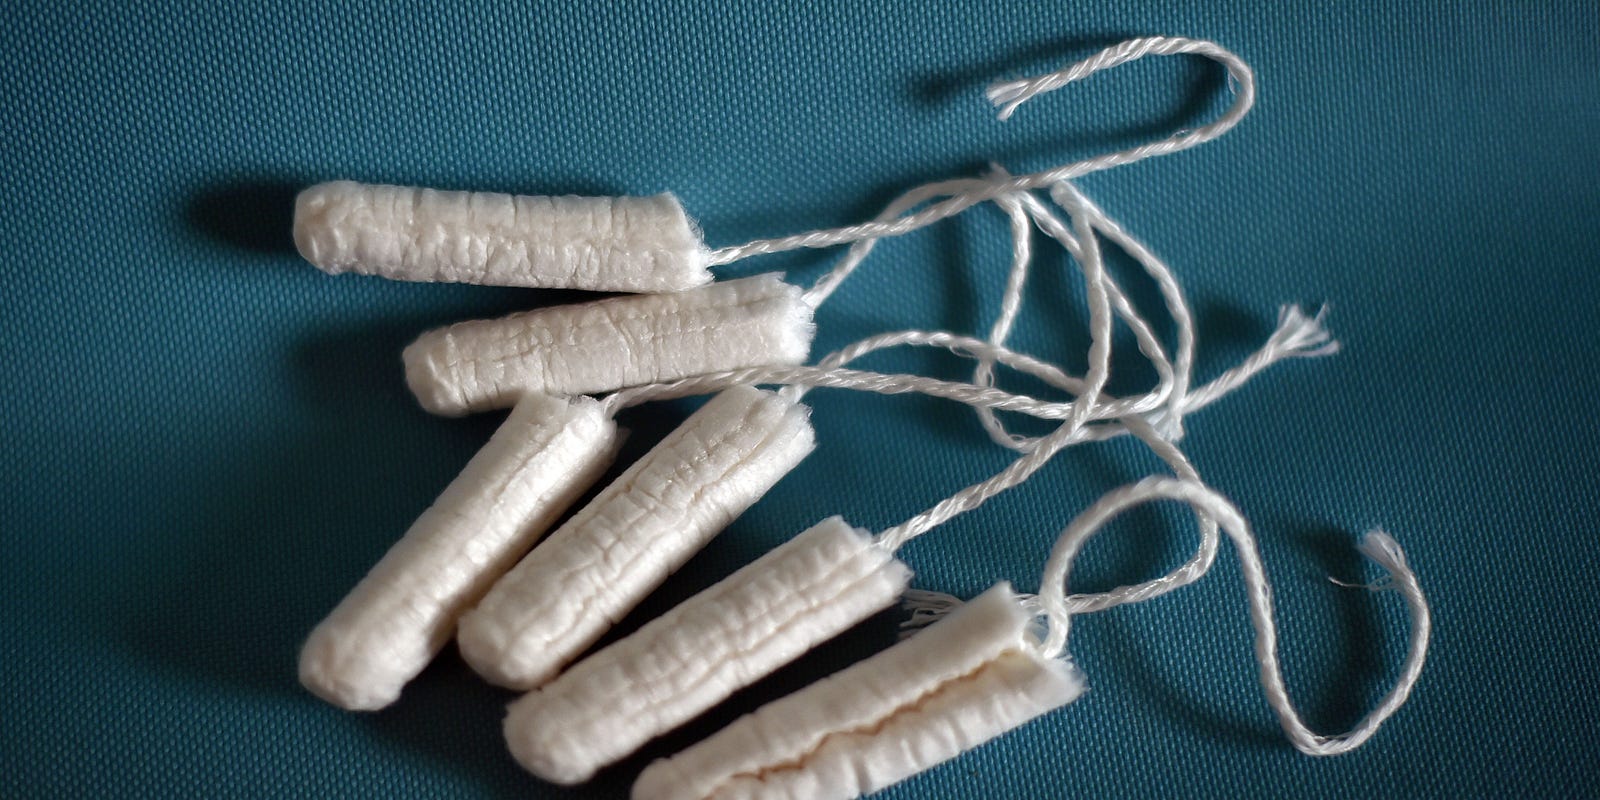 Toxic shock infections: What if I leave a tampon in for too long?